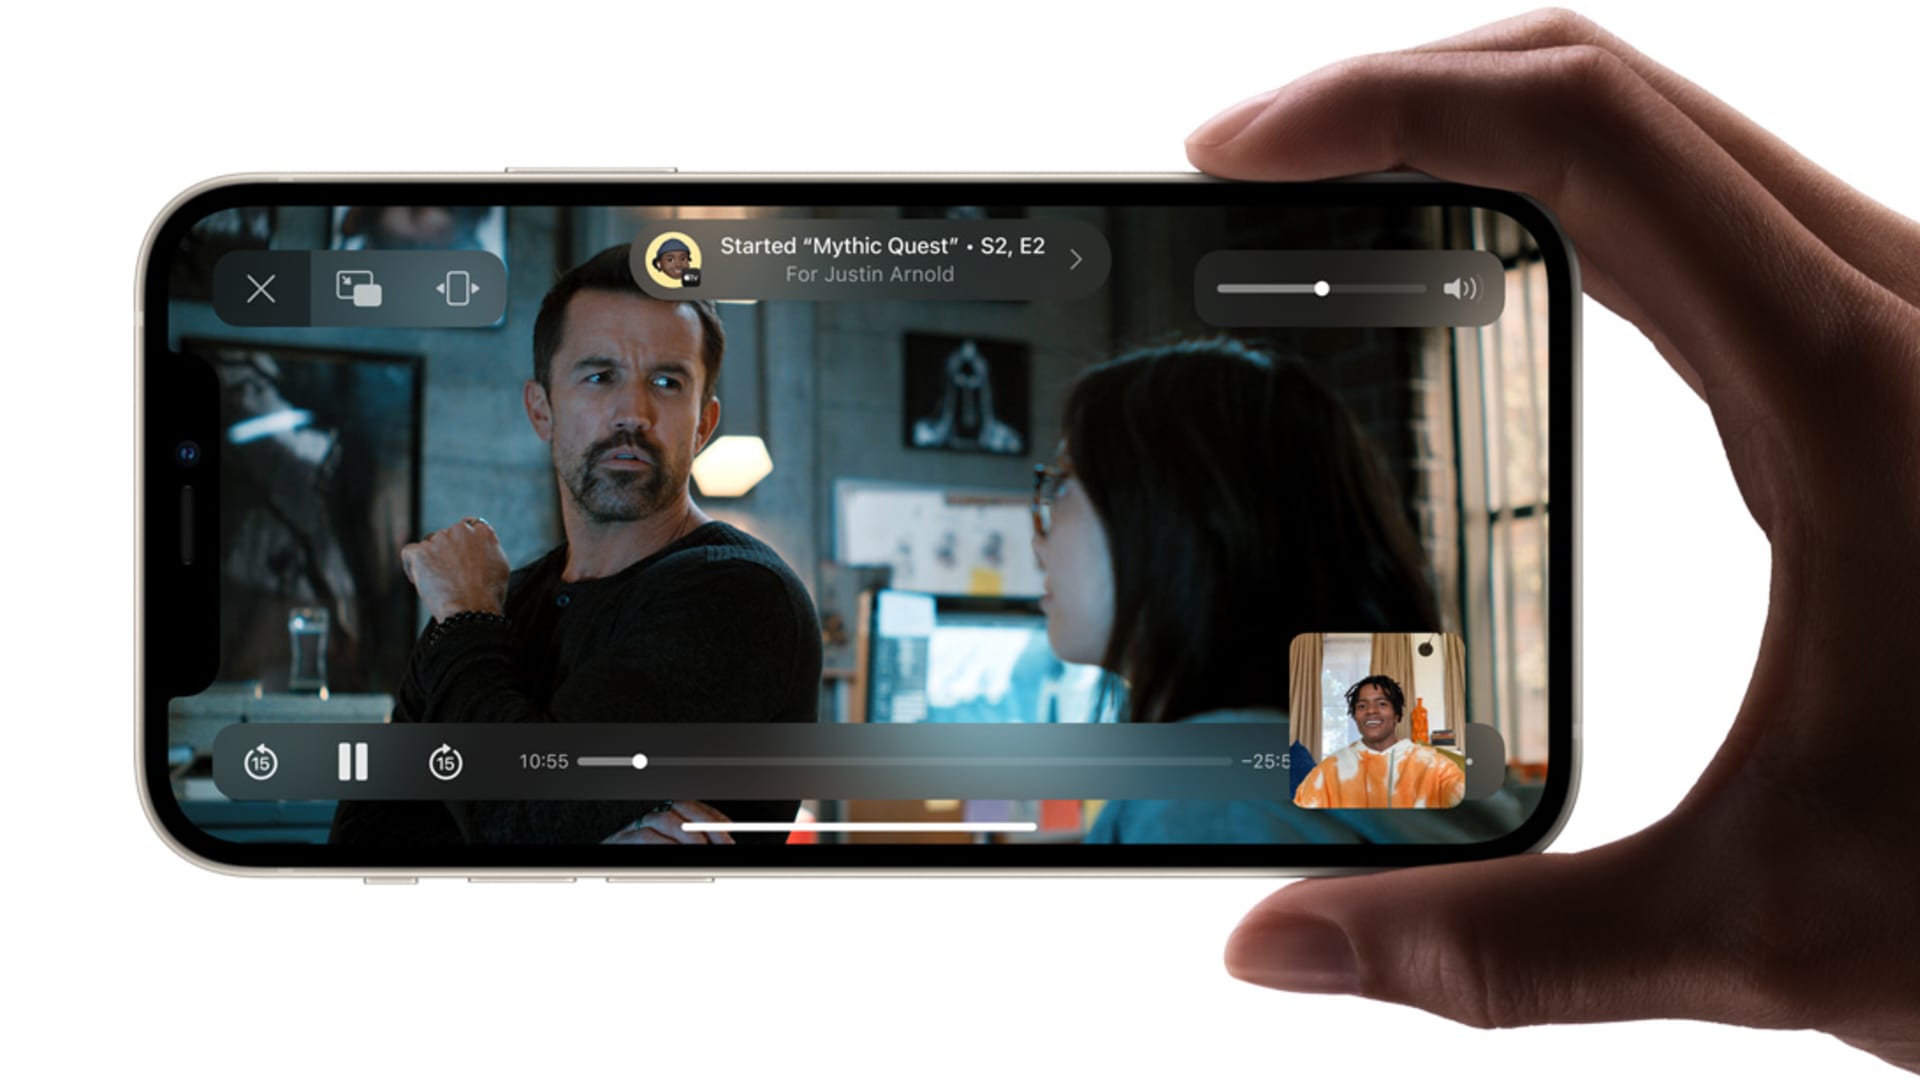 Apple iOS 15 will let you watch movies, TV shows and more with friends over FaceTime.